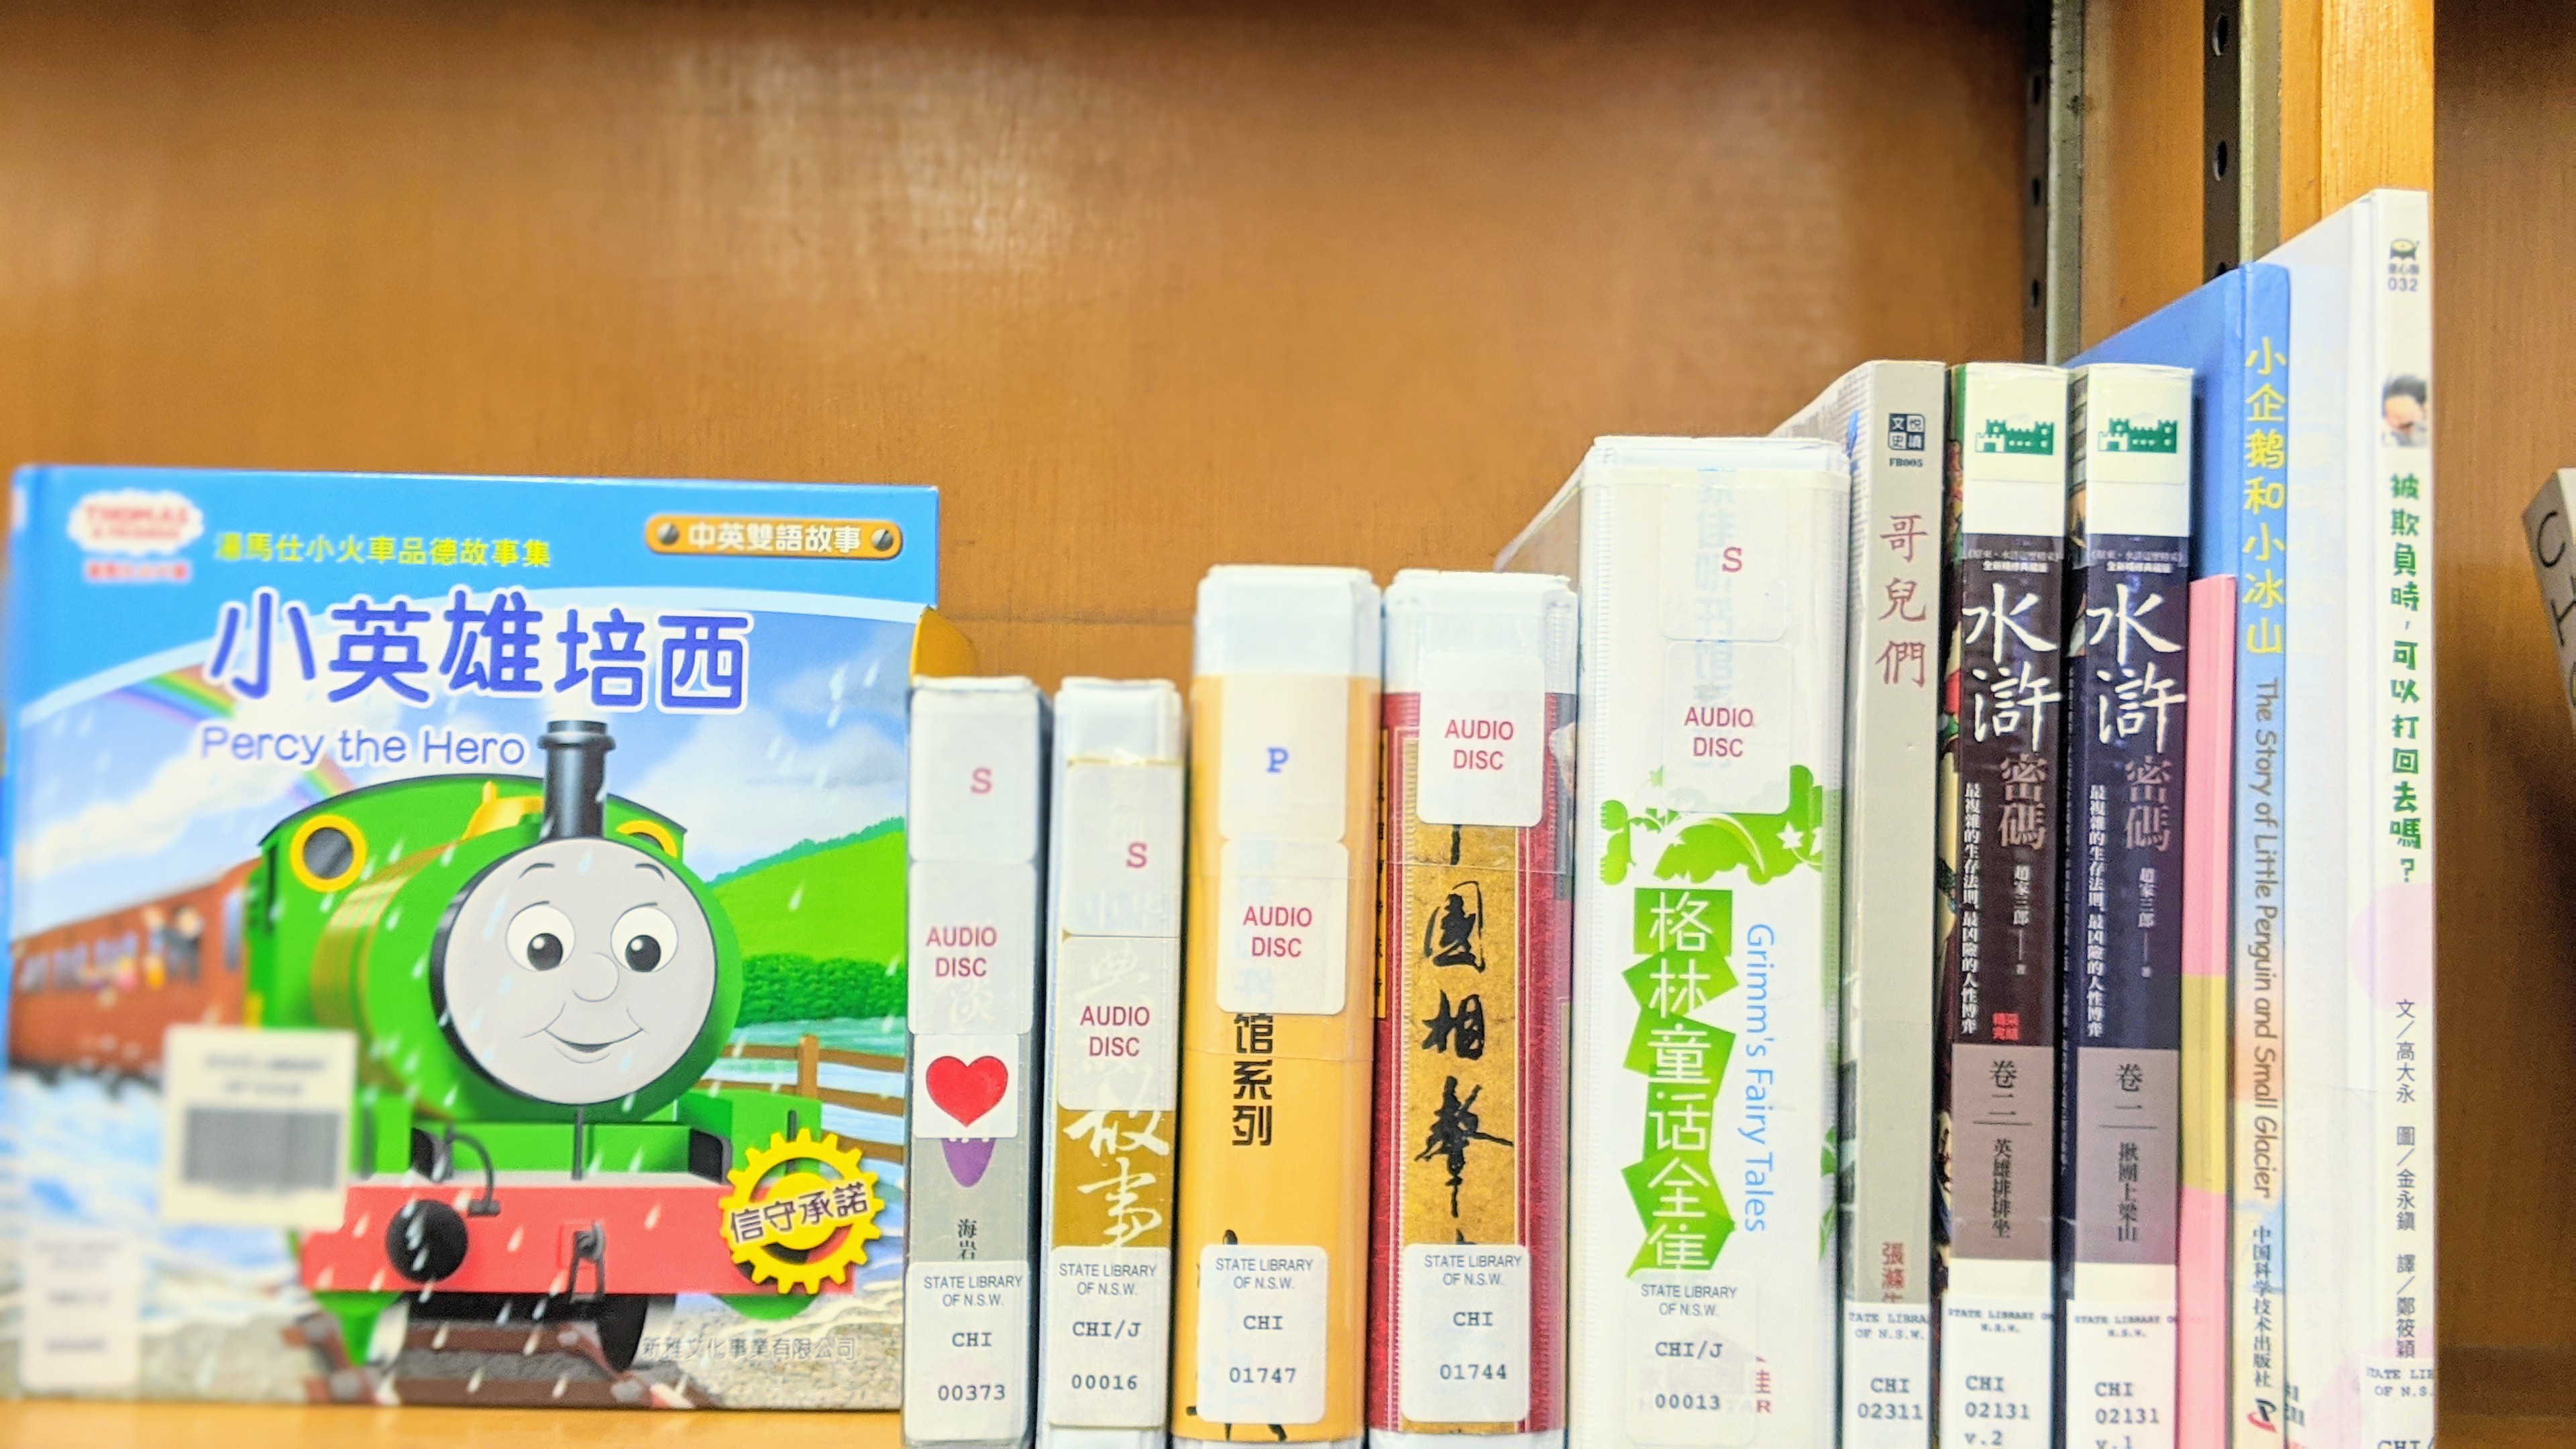 Photograph of the Chinese language books on the shelf, all spine facing camera except Percy the Hero which as an image of 'Percy' a railway locomotive